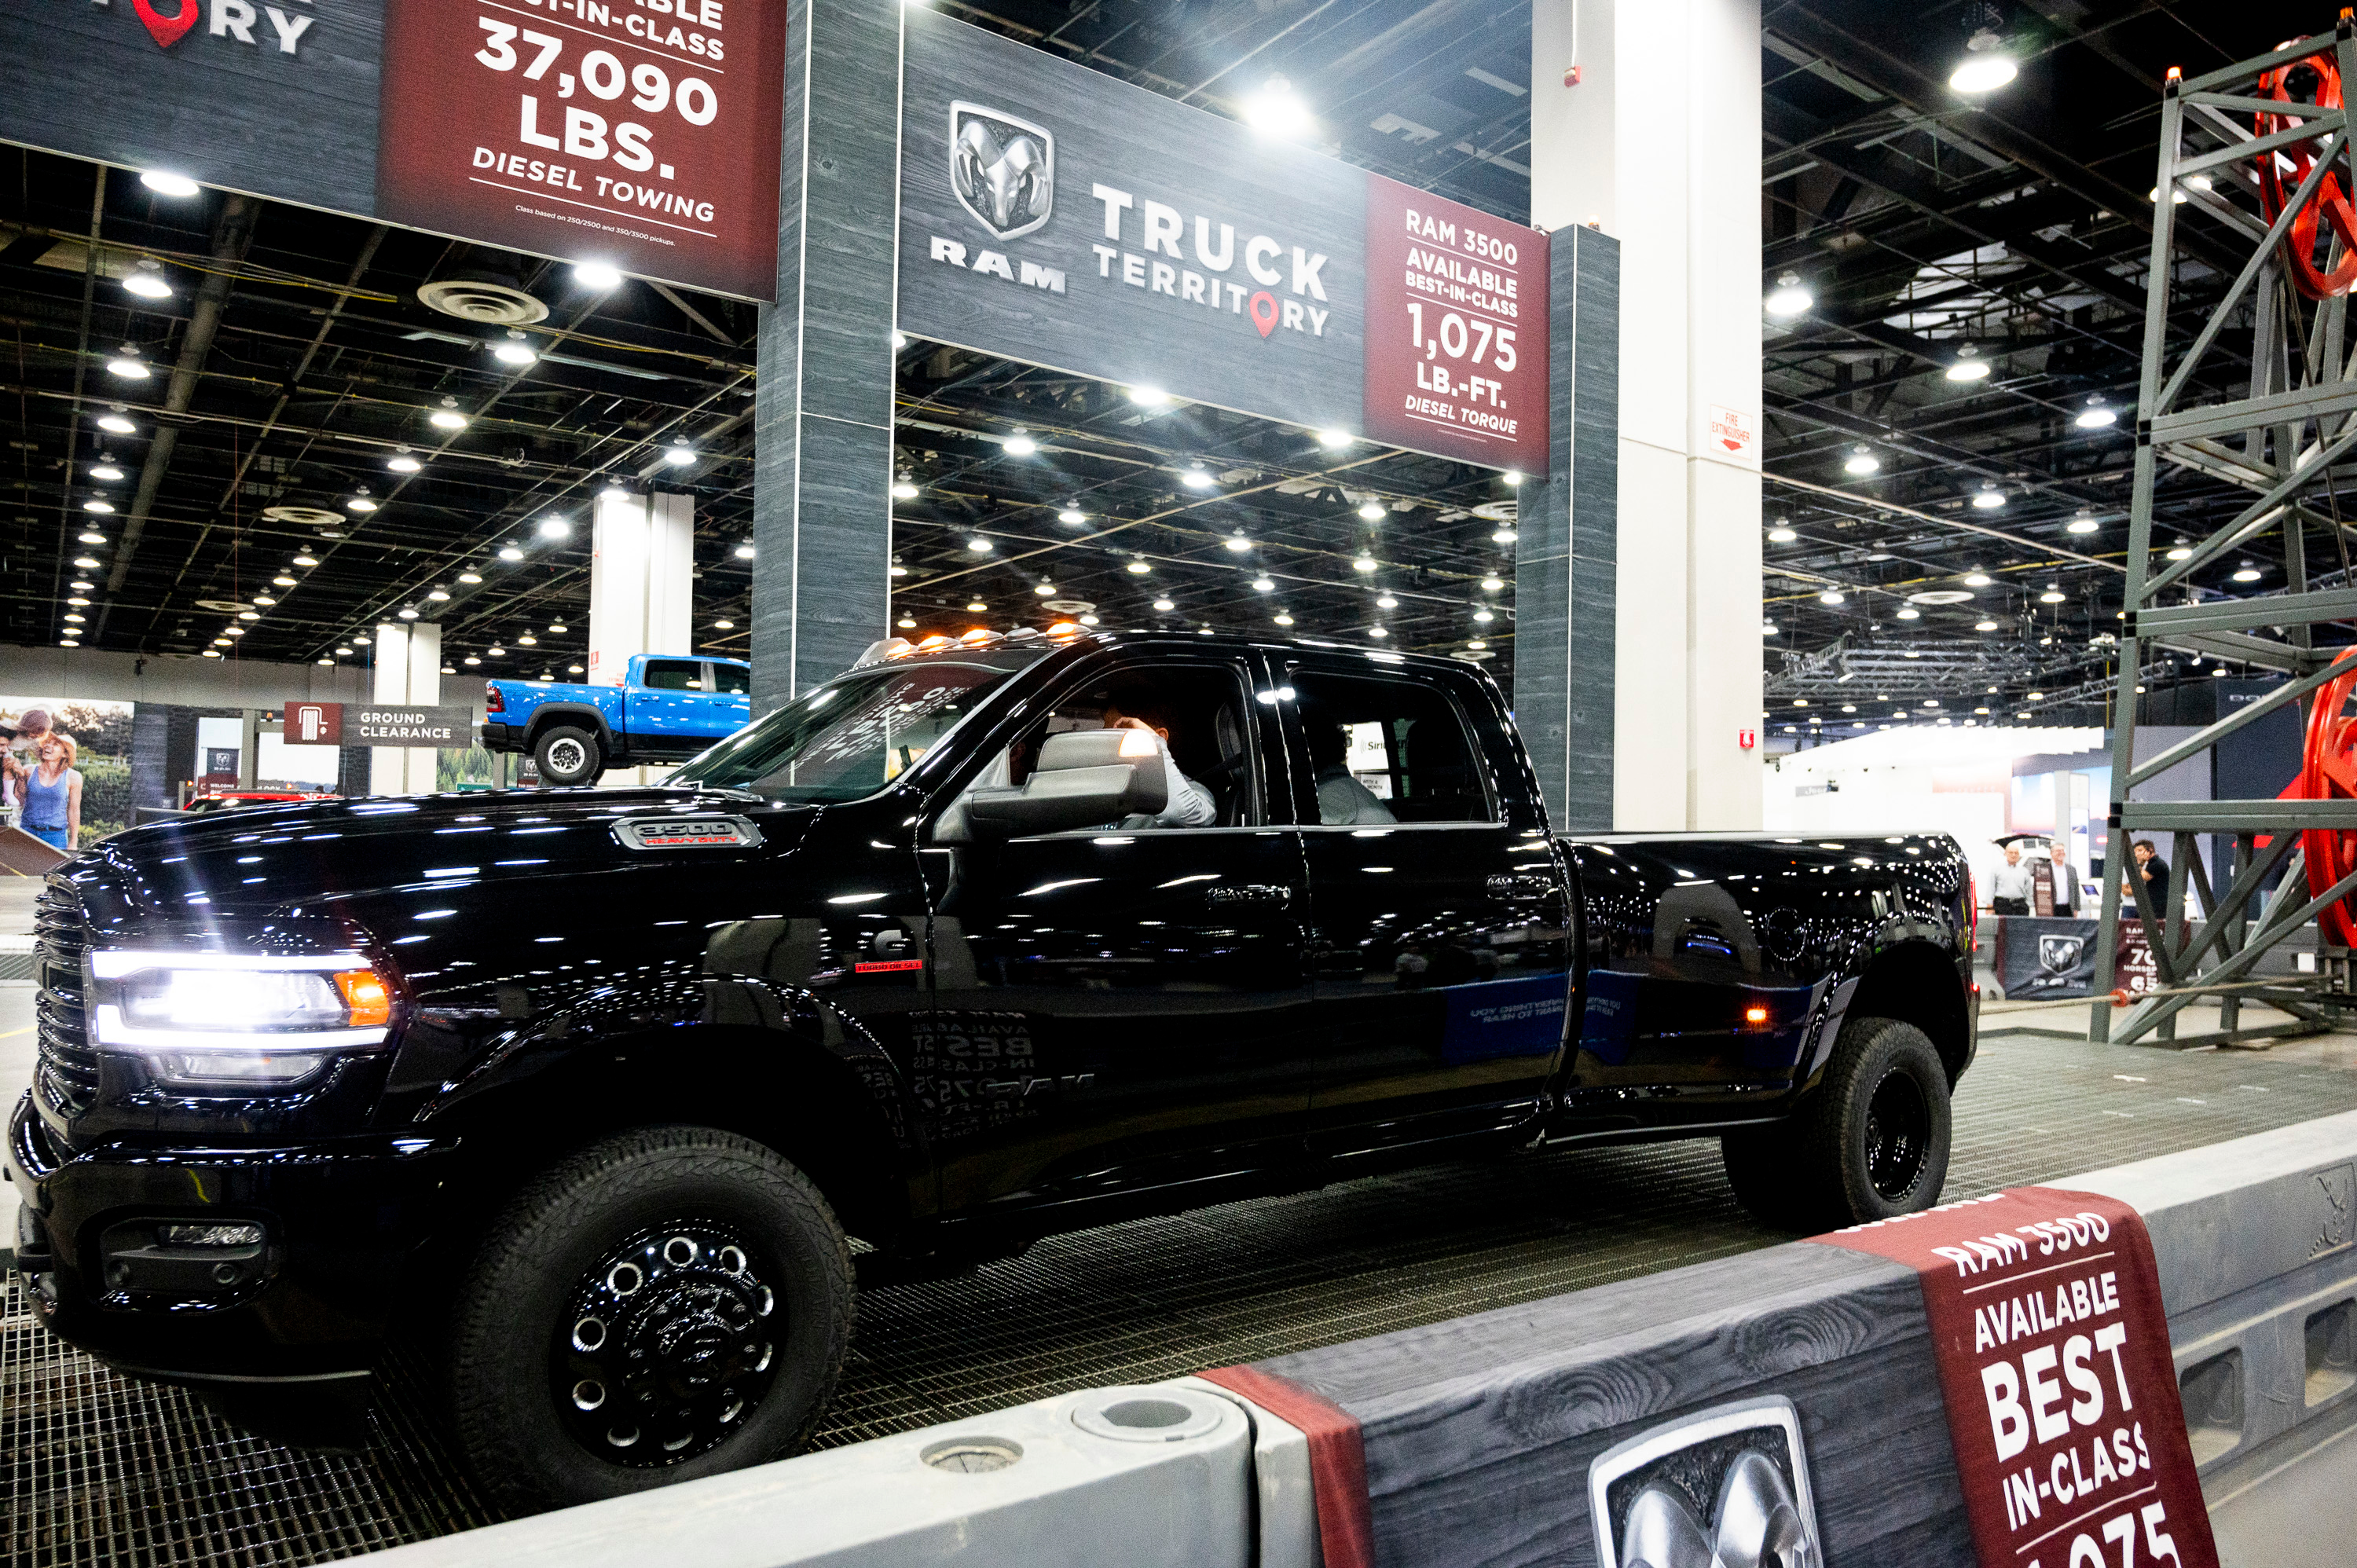 A Dodge Ram truck pulls a load during the 2022 North American International Auto Show at Huntington Place in Detroit on Wednesday, Sept. 14 2022.